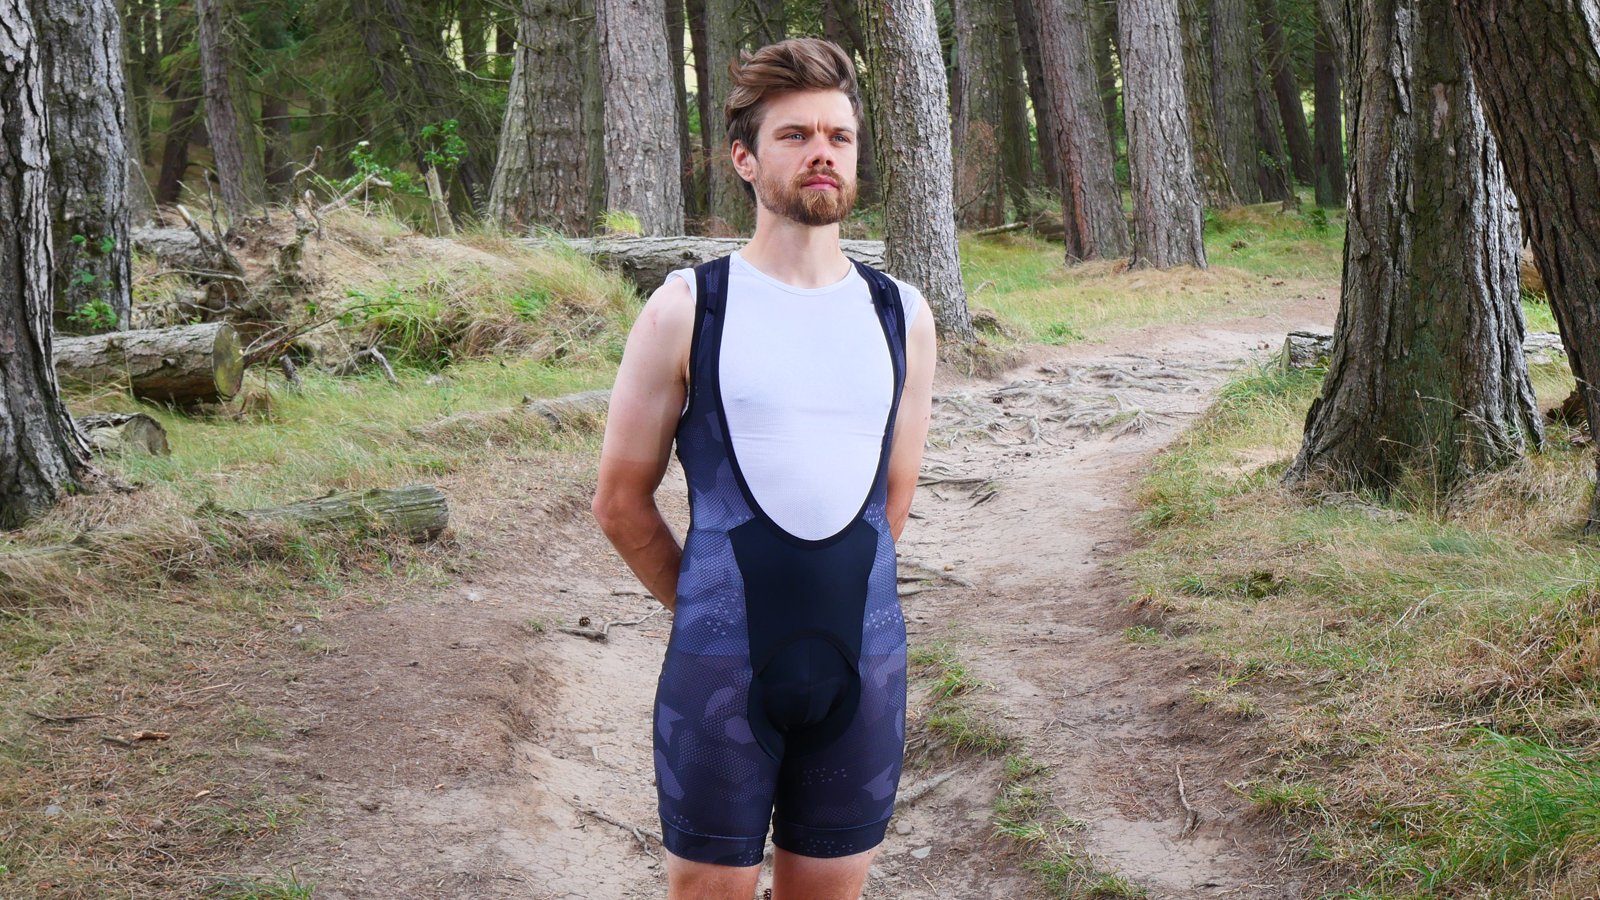 MTB liner shorts – great bib shorts for added comfort on the trail